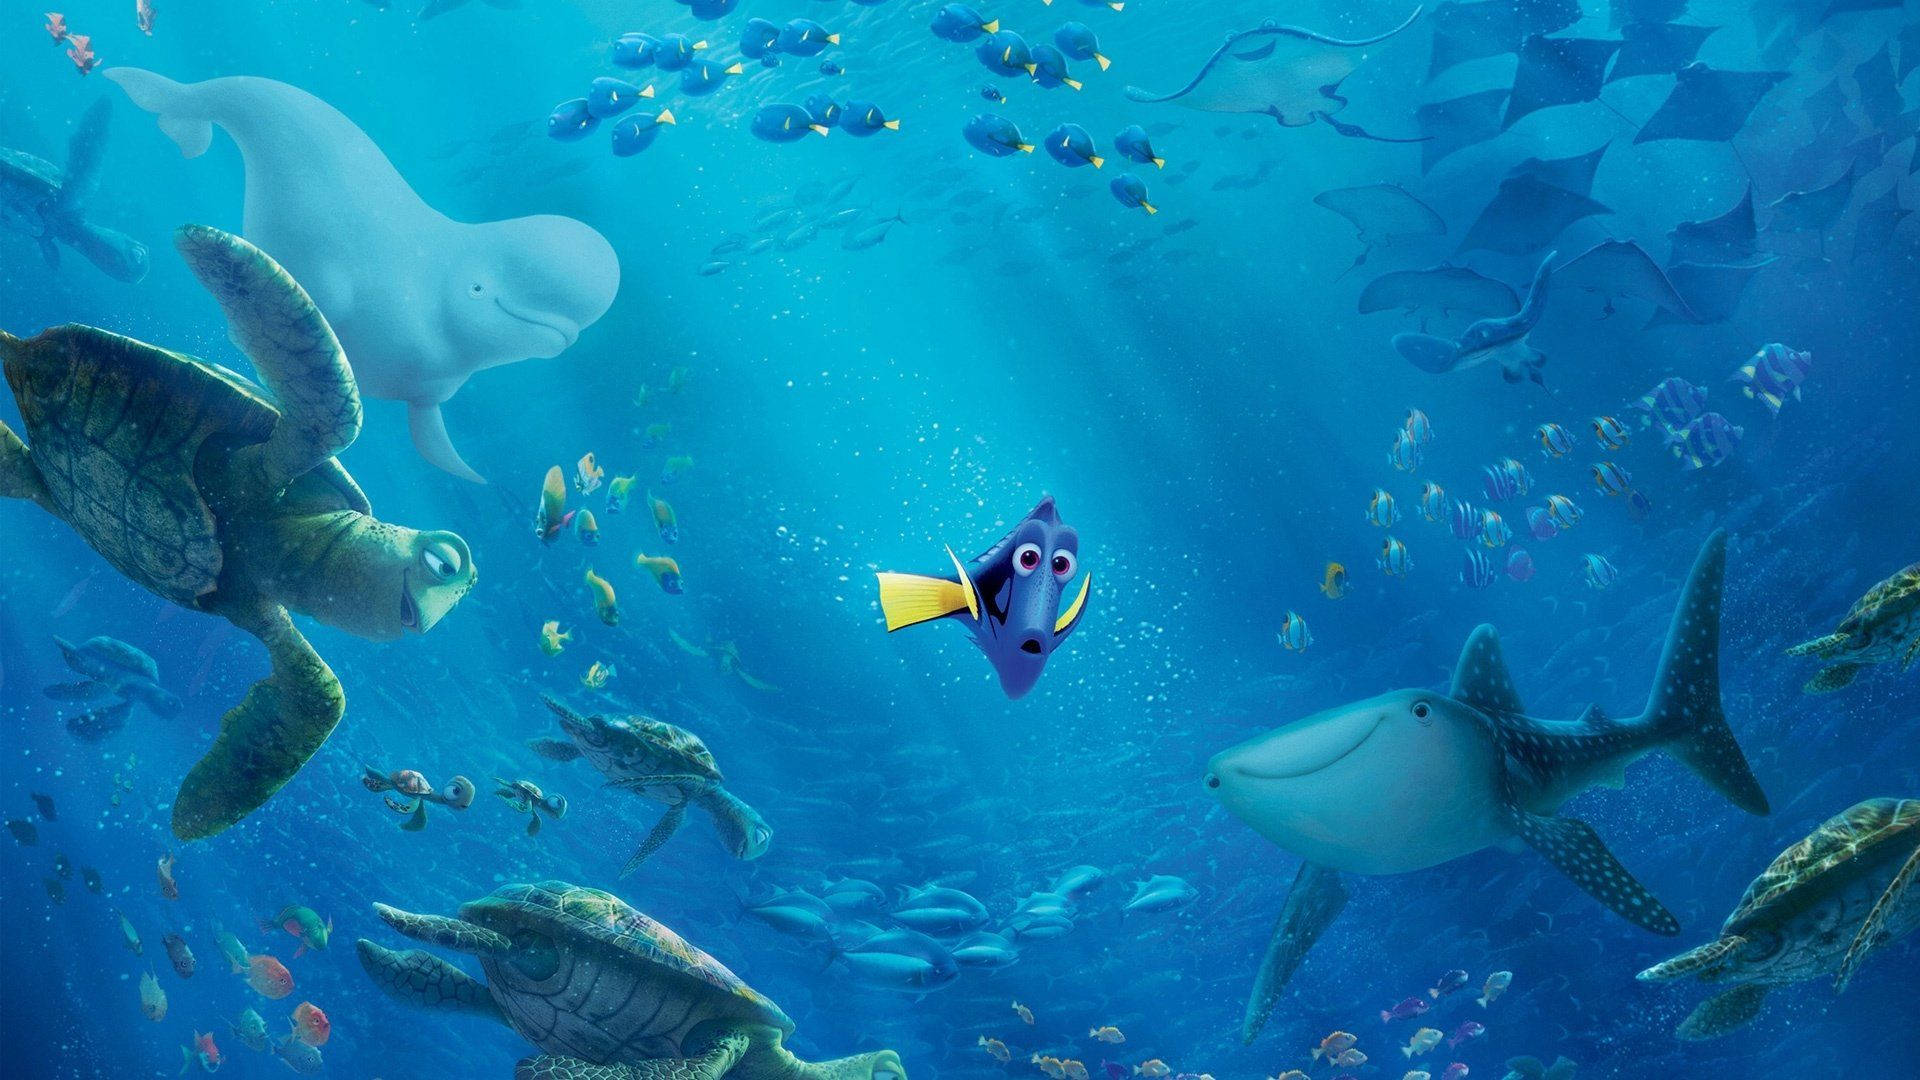 Finding Nemo Dory With Sea Creatures Wallpaper